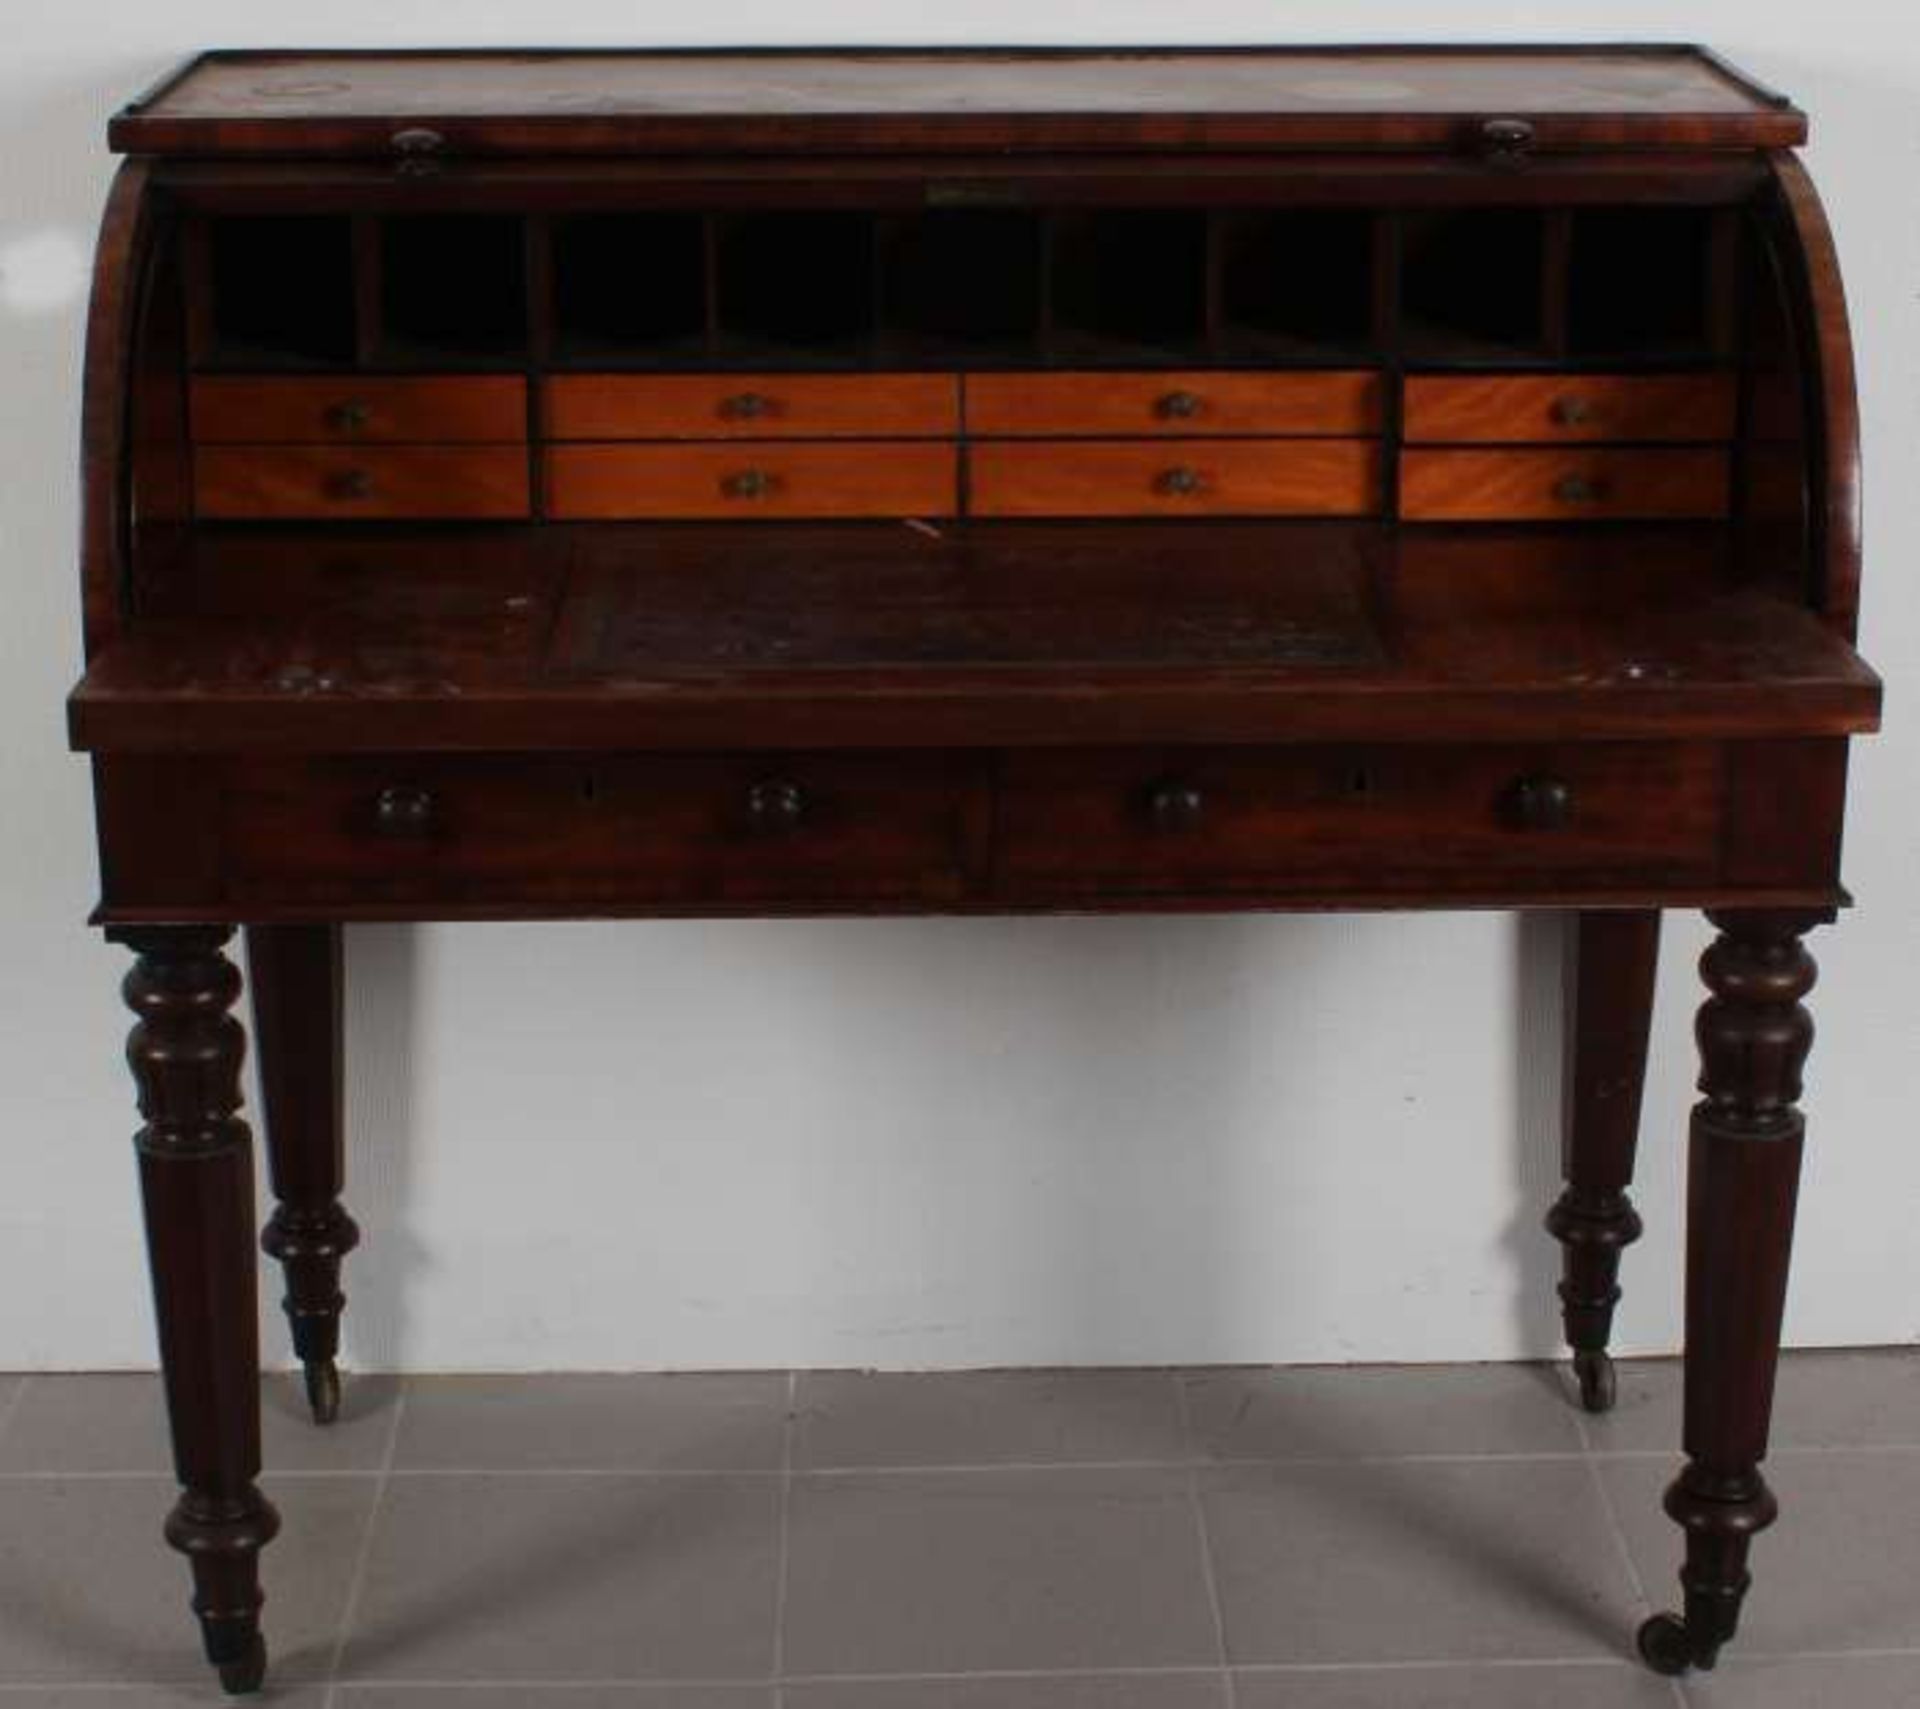 English mahogany veneer rolbureau with 6 drawers, roll and fold away writing tablet 1860 in very - Image 2 of 2